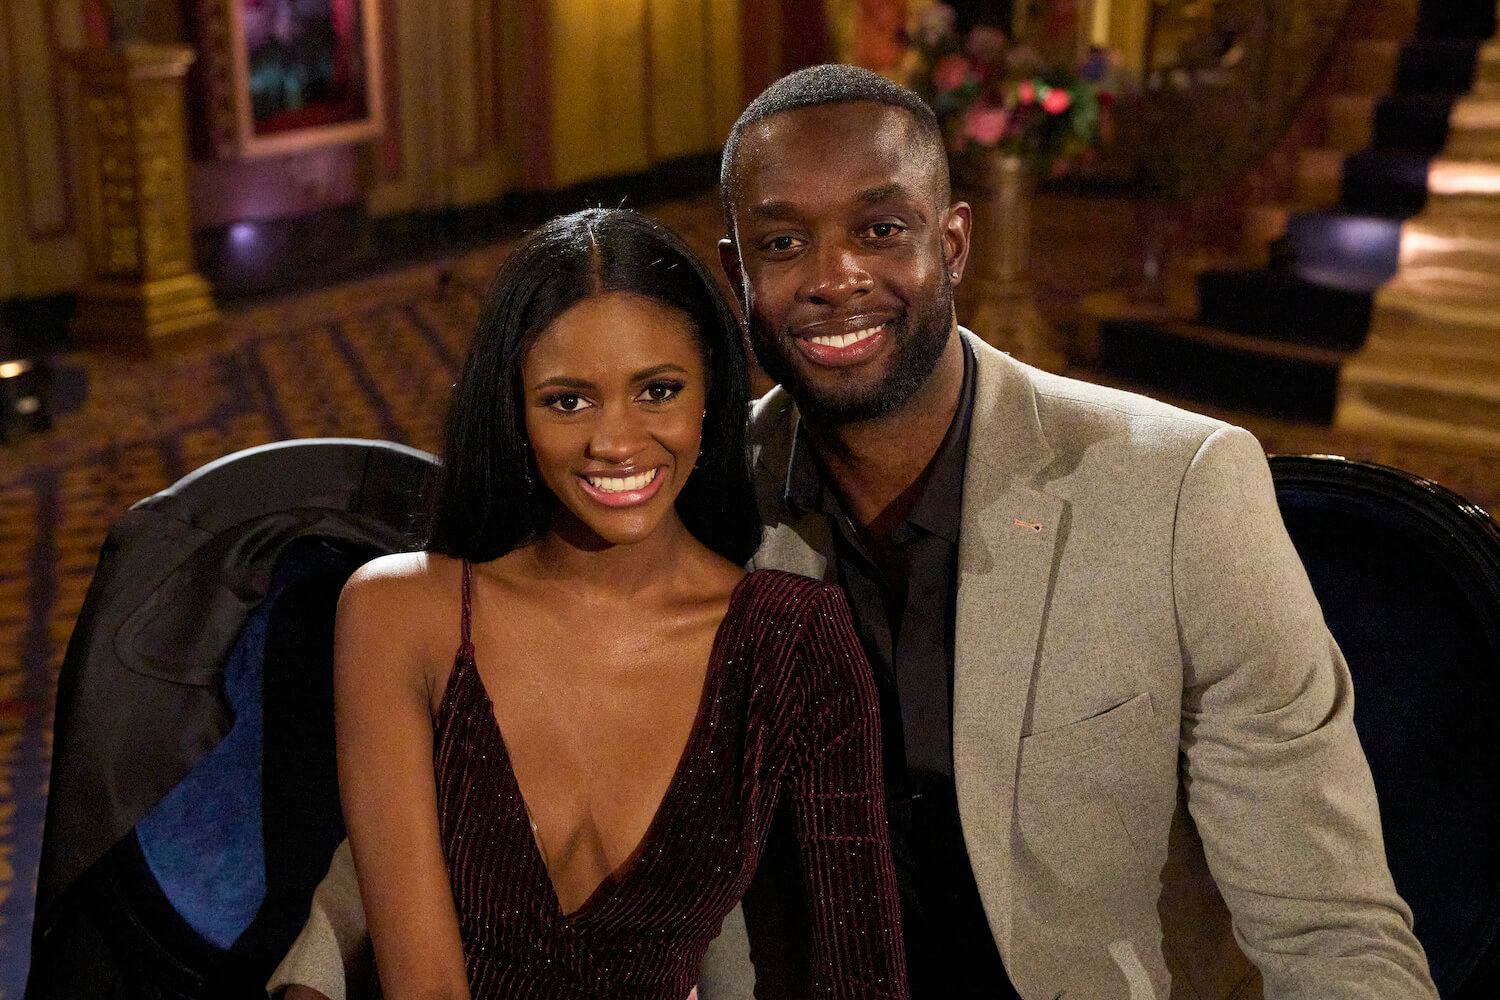 Charity Lawson and Aaron Bryant from 'The Bachelorette' 2023 sitting next to each other and smiling